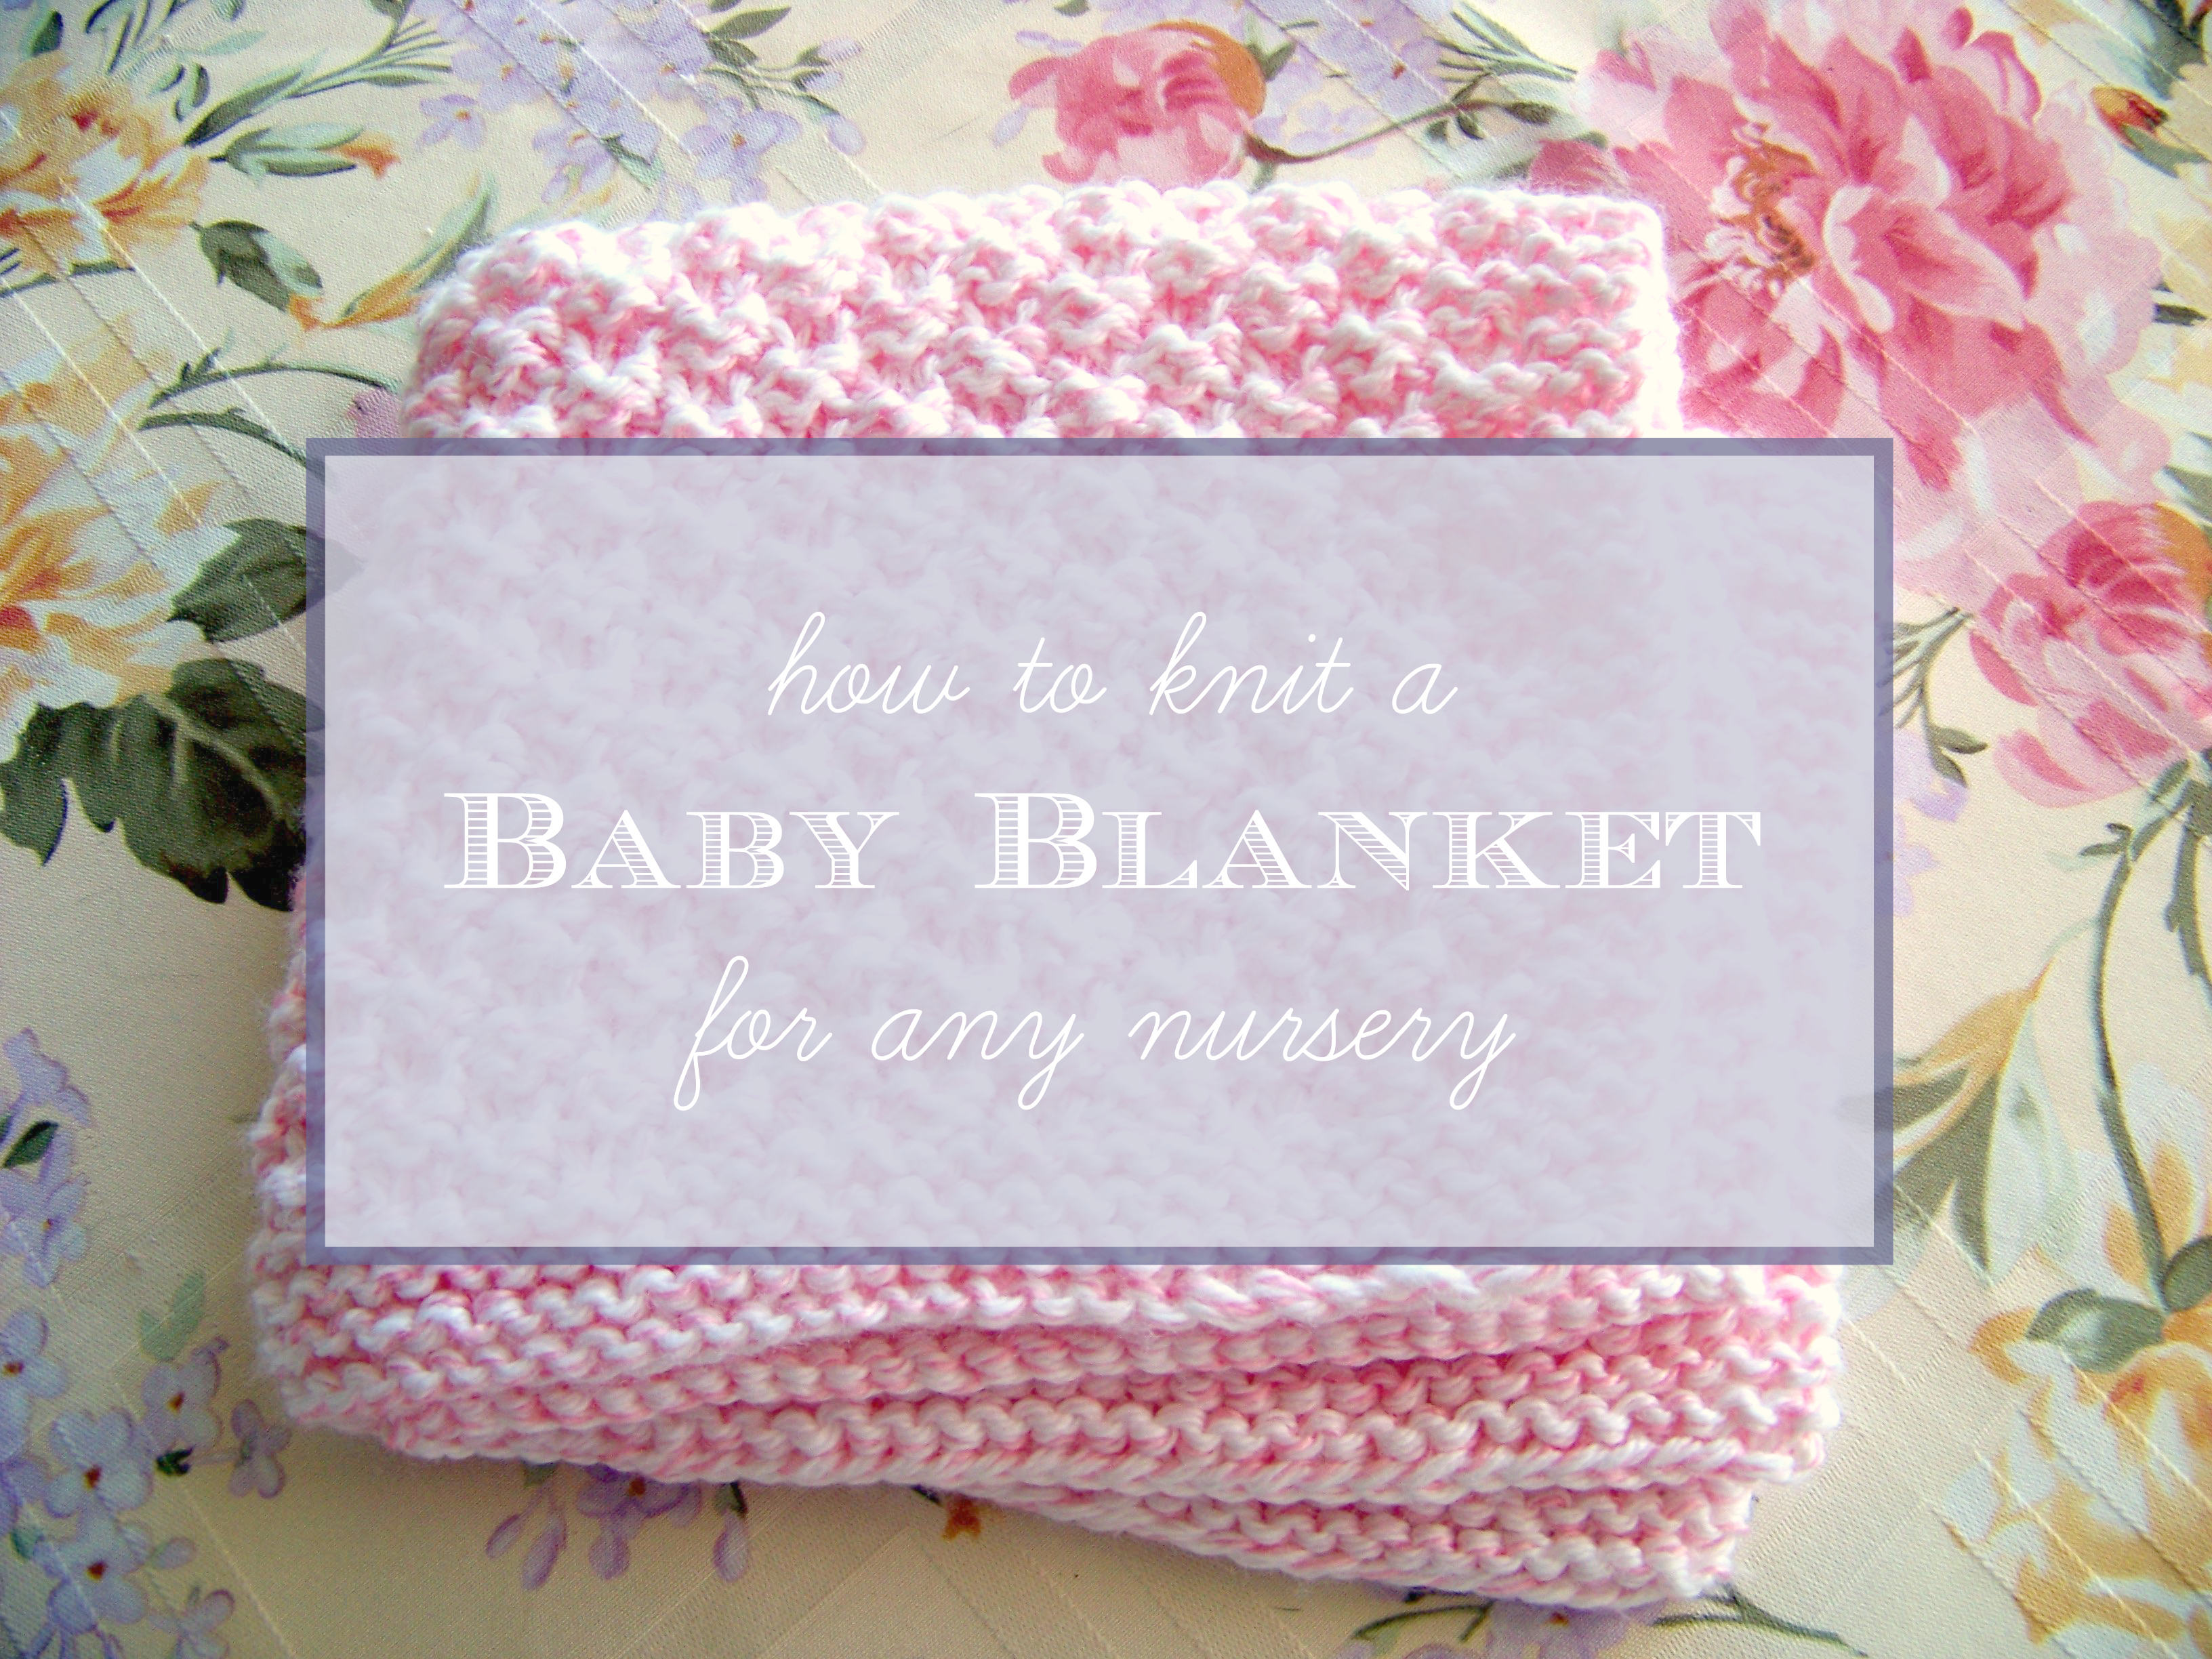 Free Easy Baby Blanket Knitting Patterns For Beginners Easy Knitting Patterns For Ba Blankets Beginners Pattern Beginner